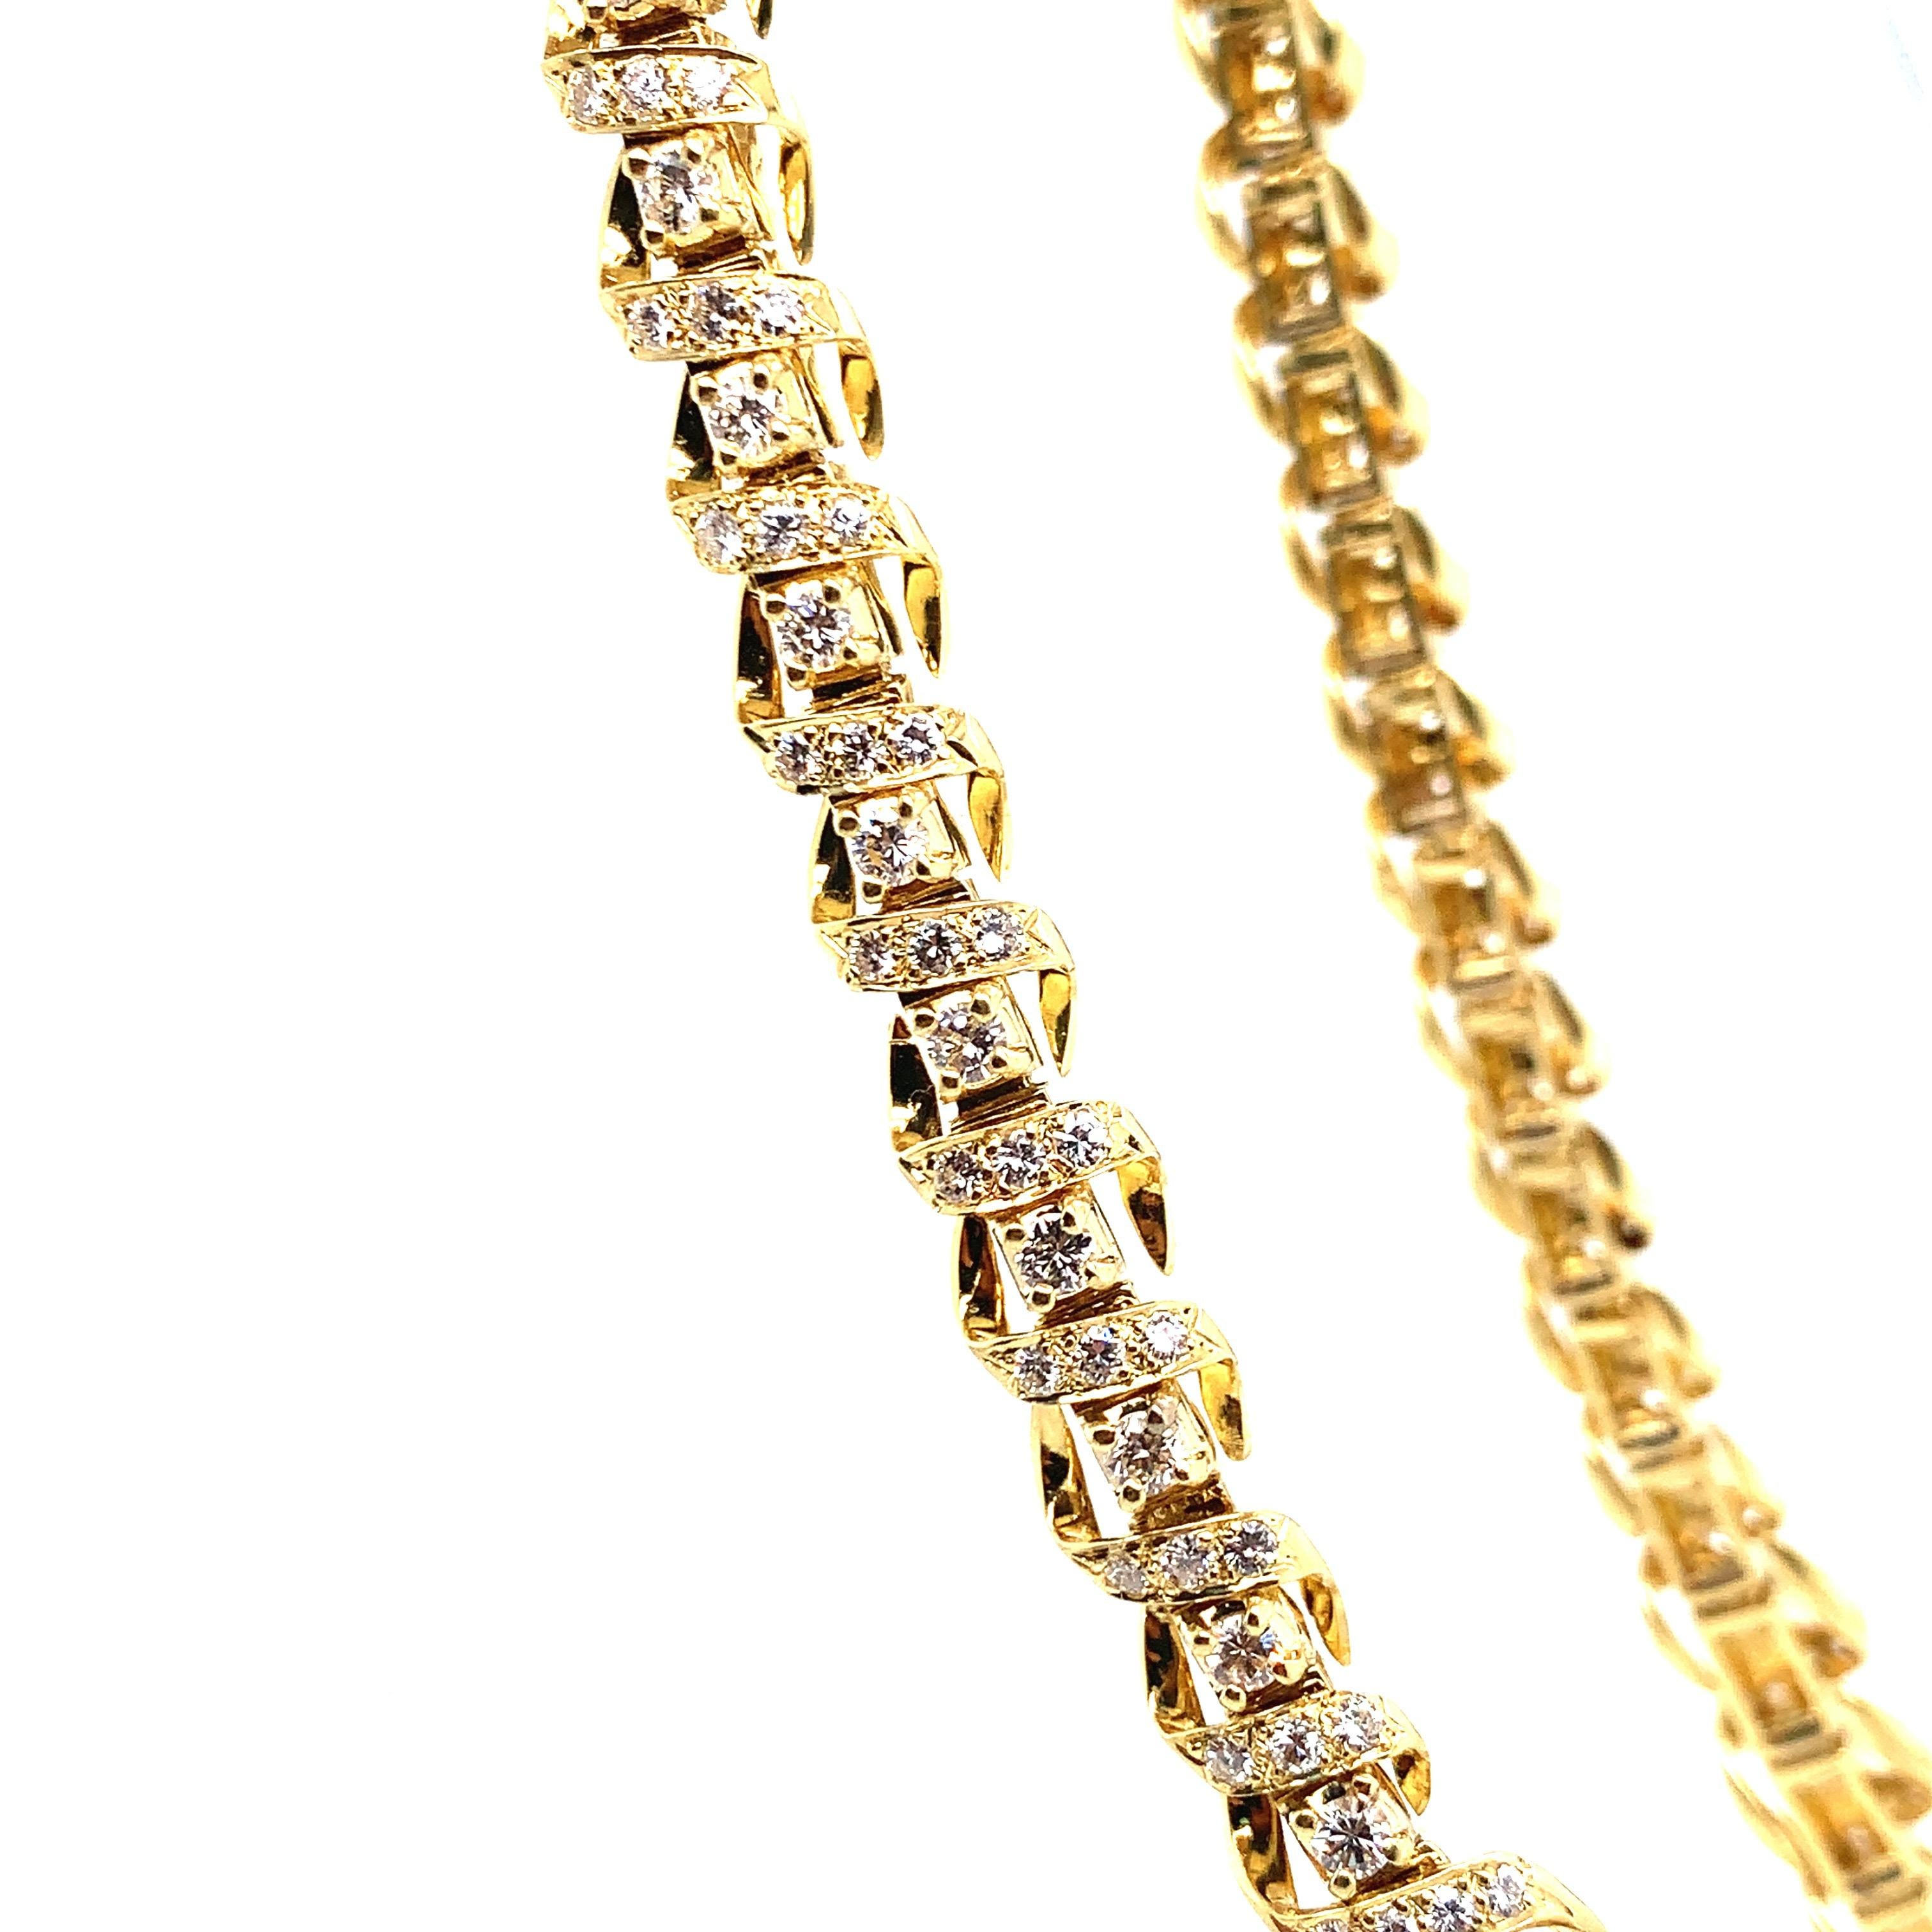 An elegant necklace consisting of 59 round diamonds that weigh approximately 5.50 carats, and 197 round diamonds that weigh approximately 5.70 carats. Set in yellow gold, this piece weighs a total of 77.7 grams. The length is 16 inches. 

Perfect